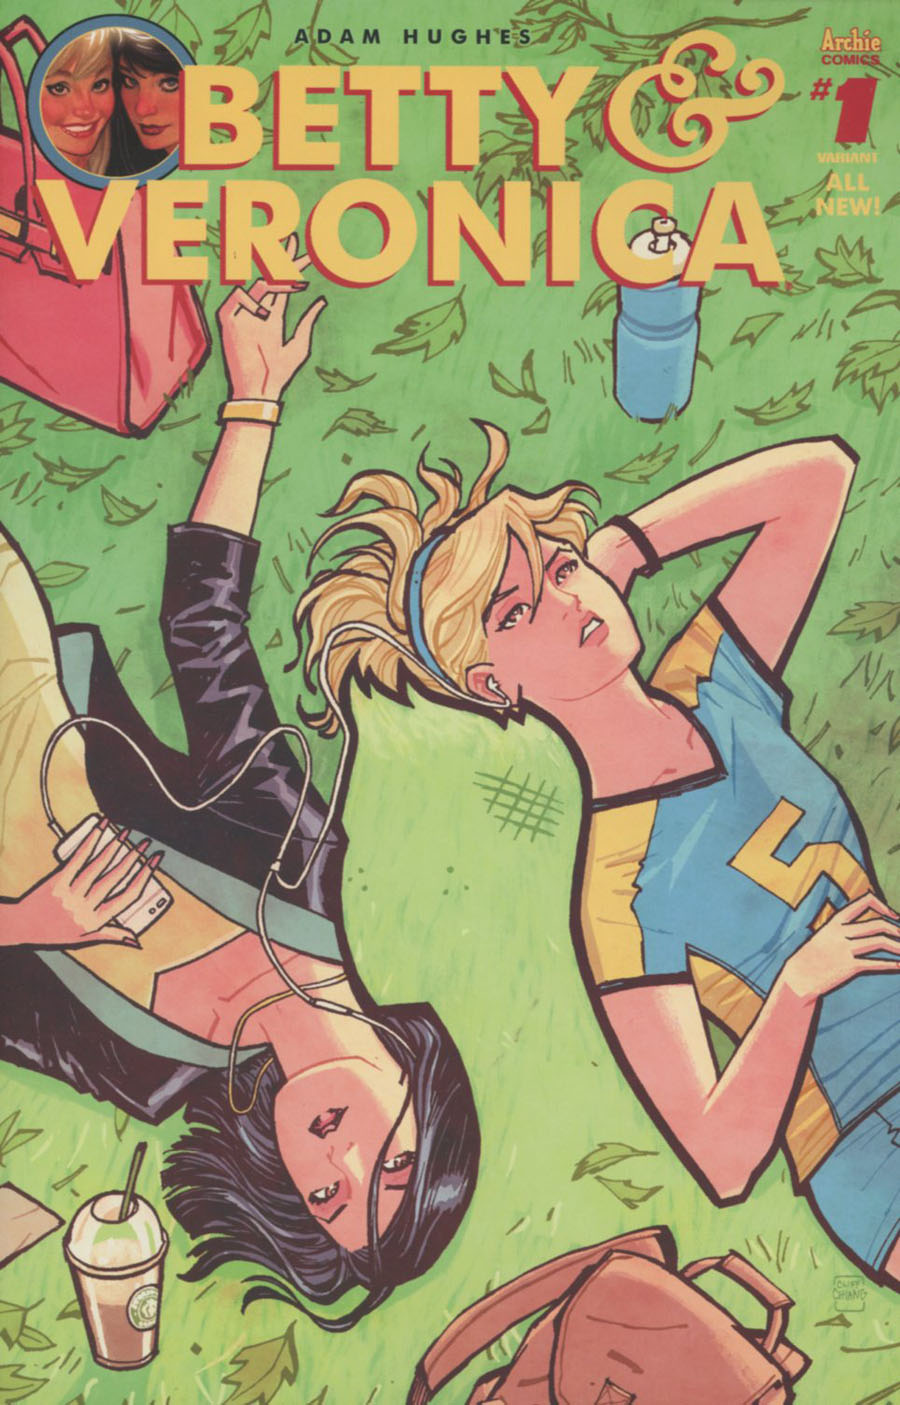 Betty & Veronica Vol 2 #1 Cover E Variant Cliff Chiang Cover